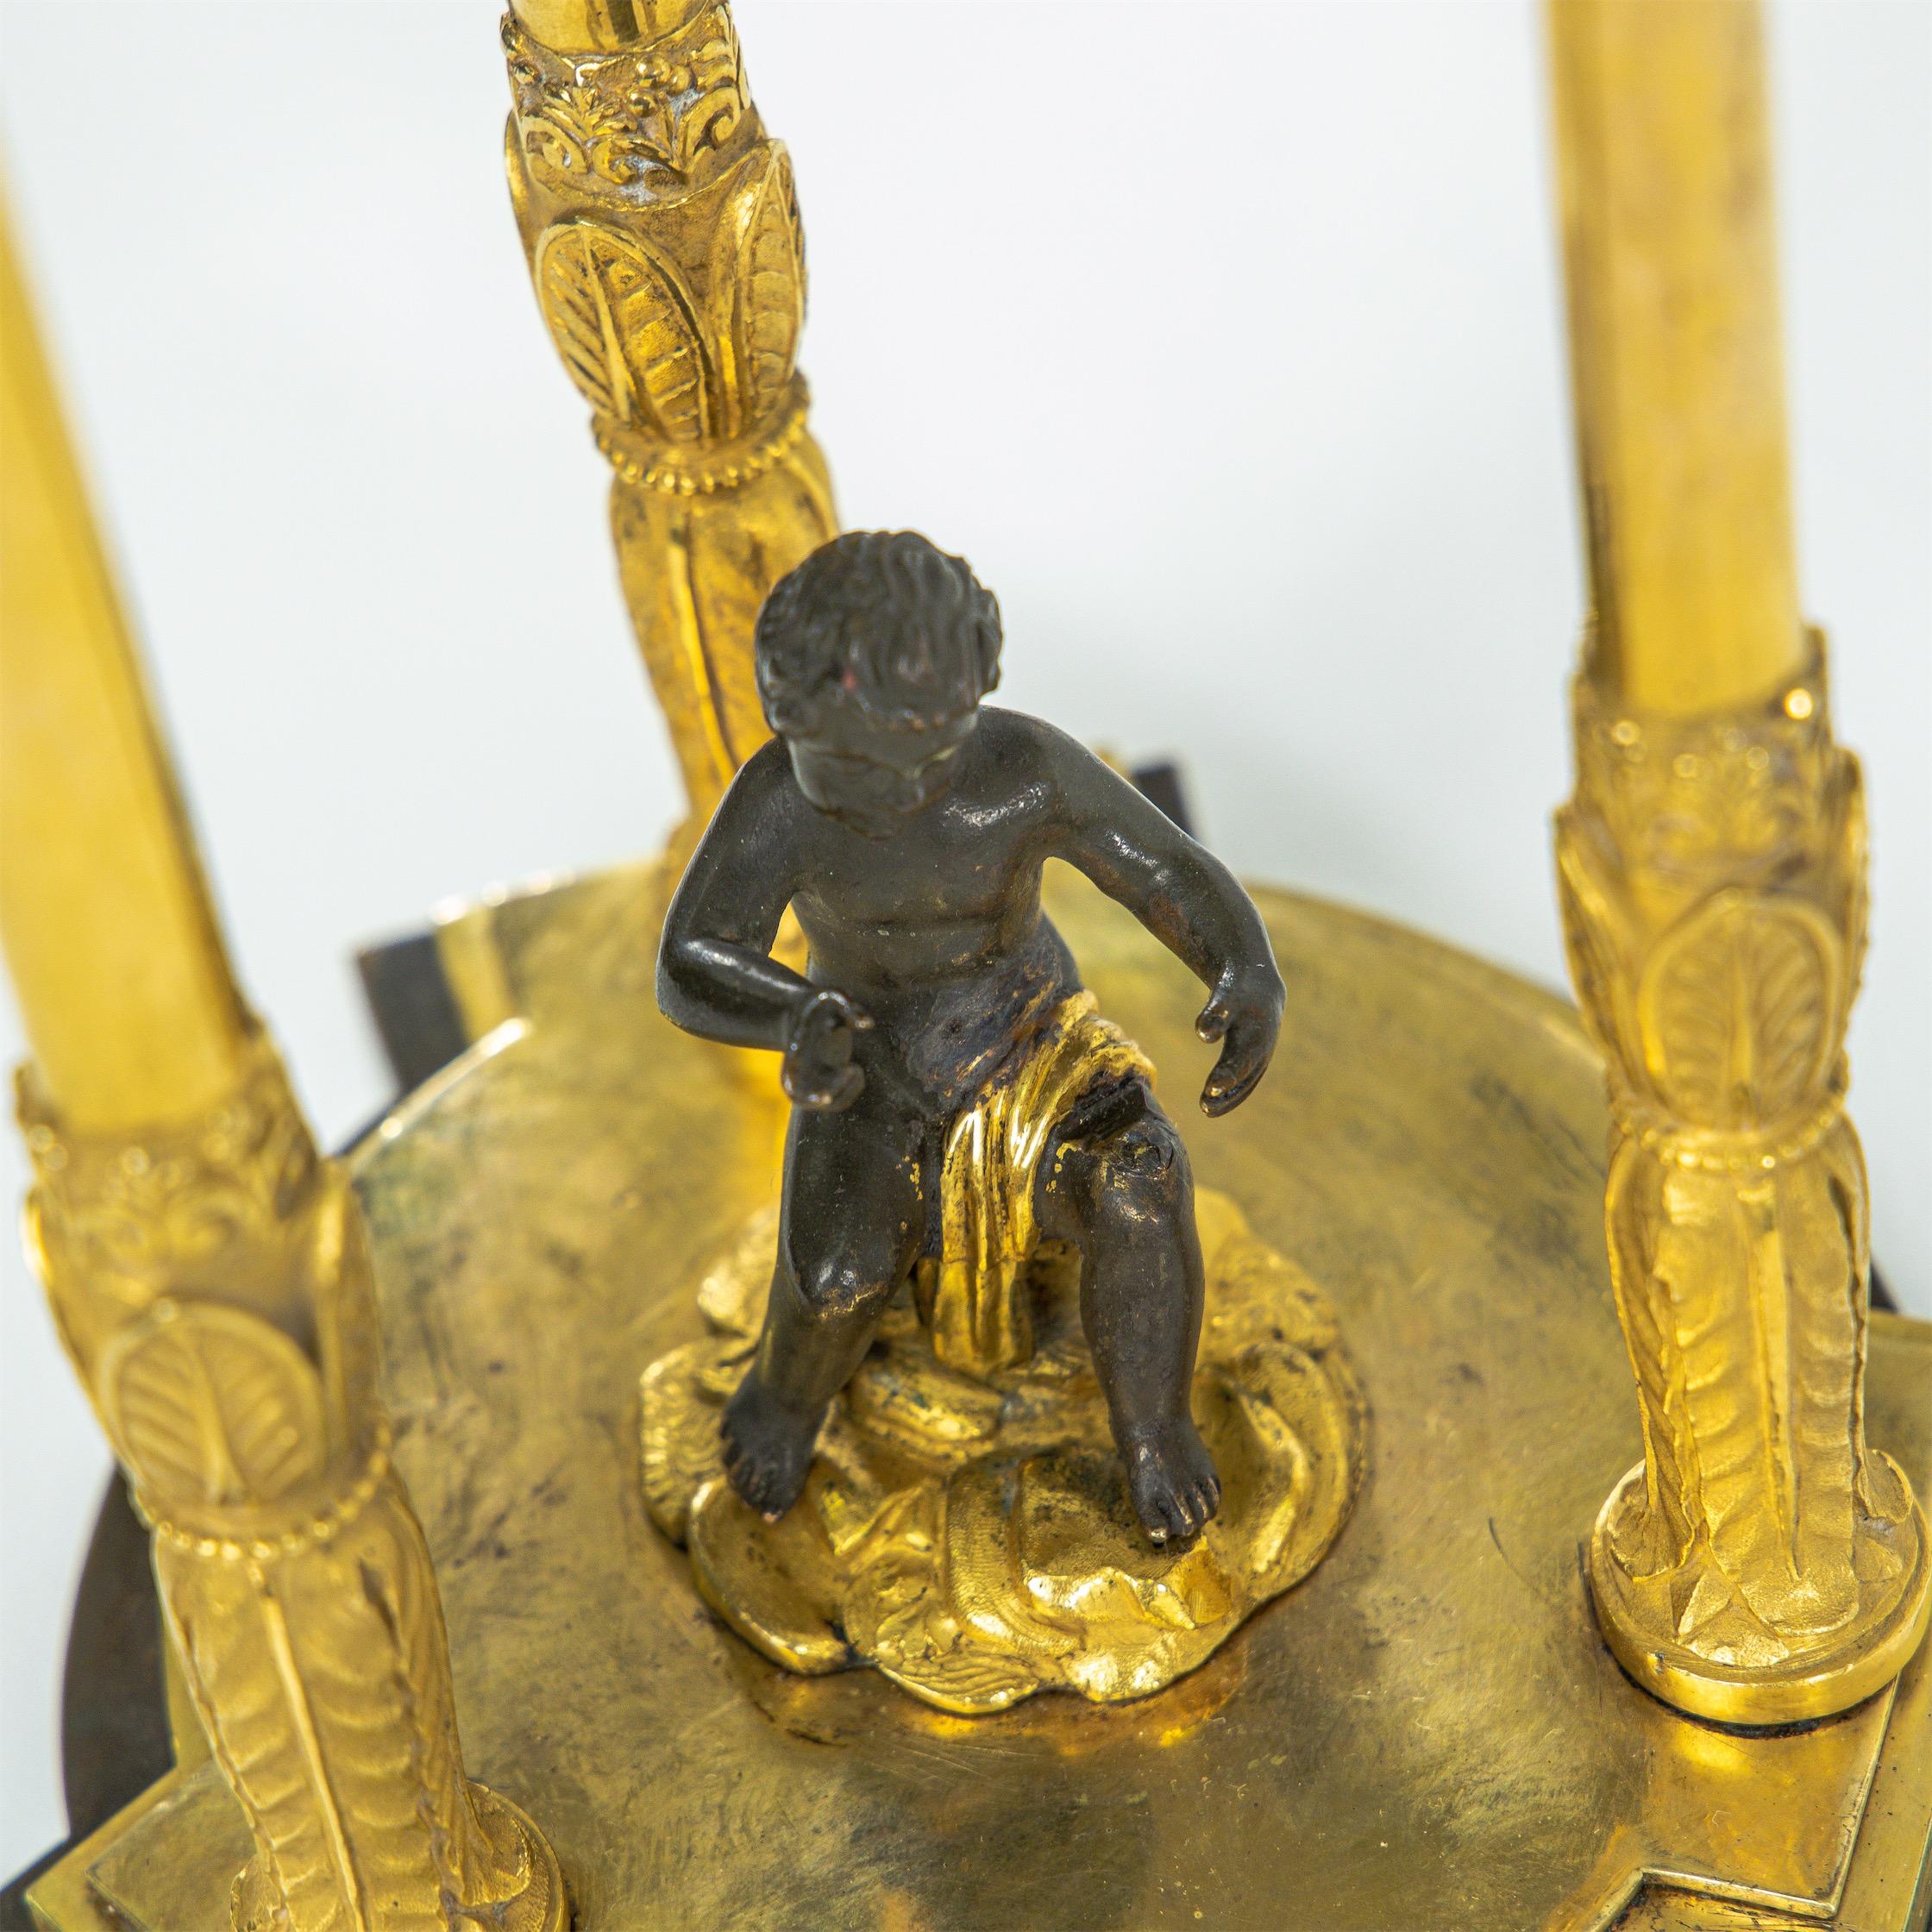 Empire Centerpiece with Putto Decor, Bronze and Glass, Early 19th Century For Sale 8